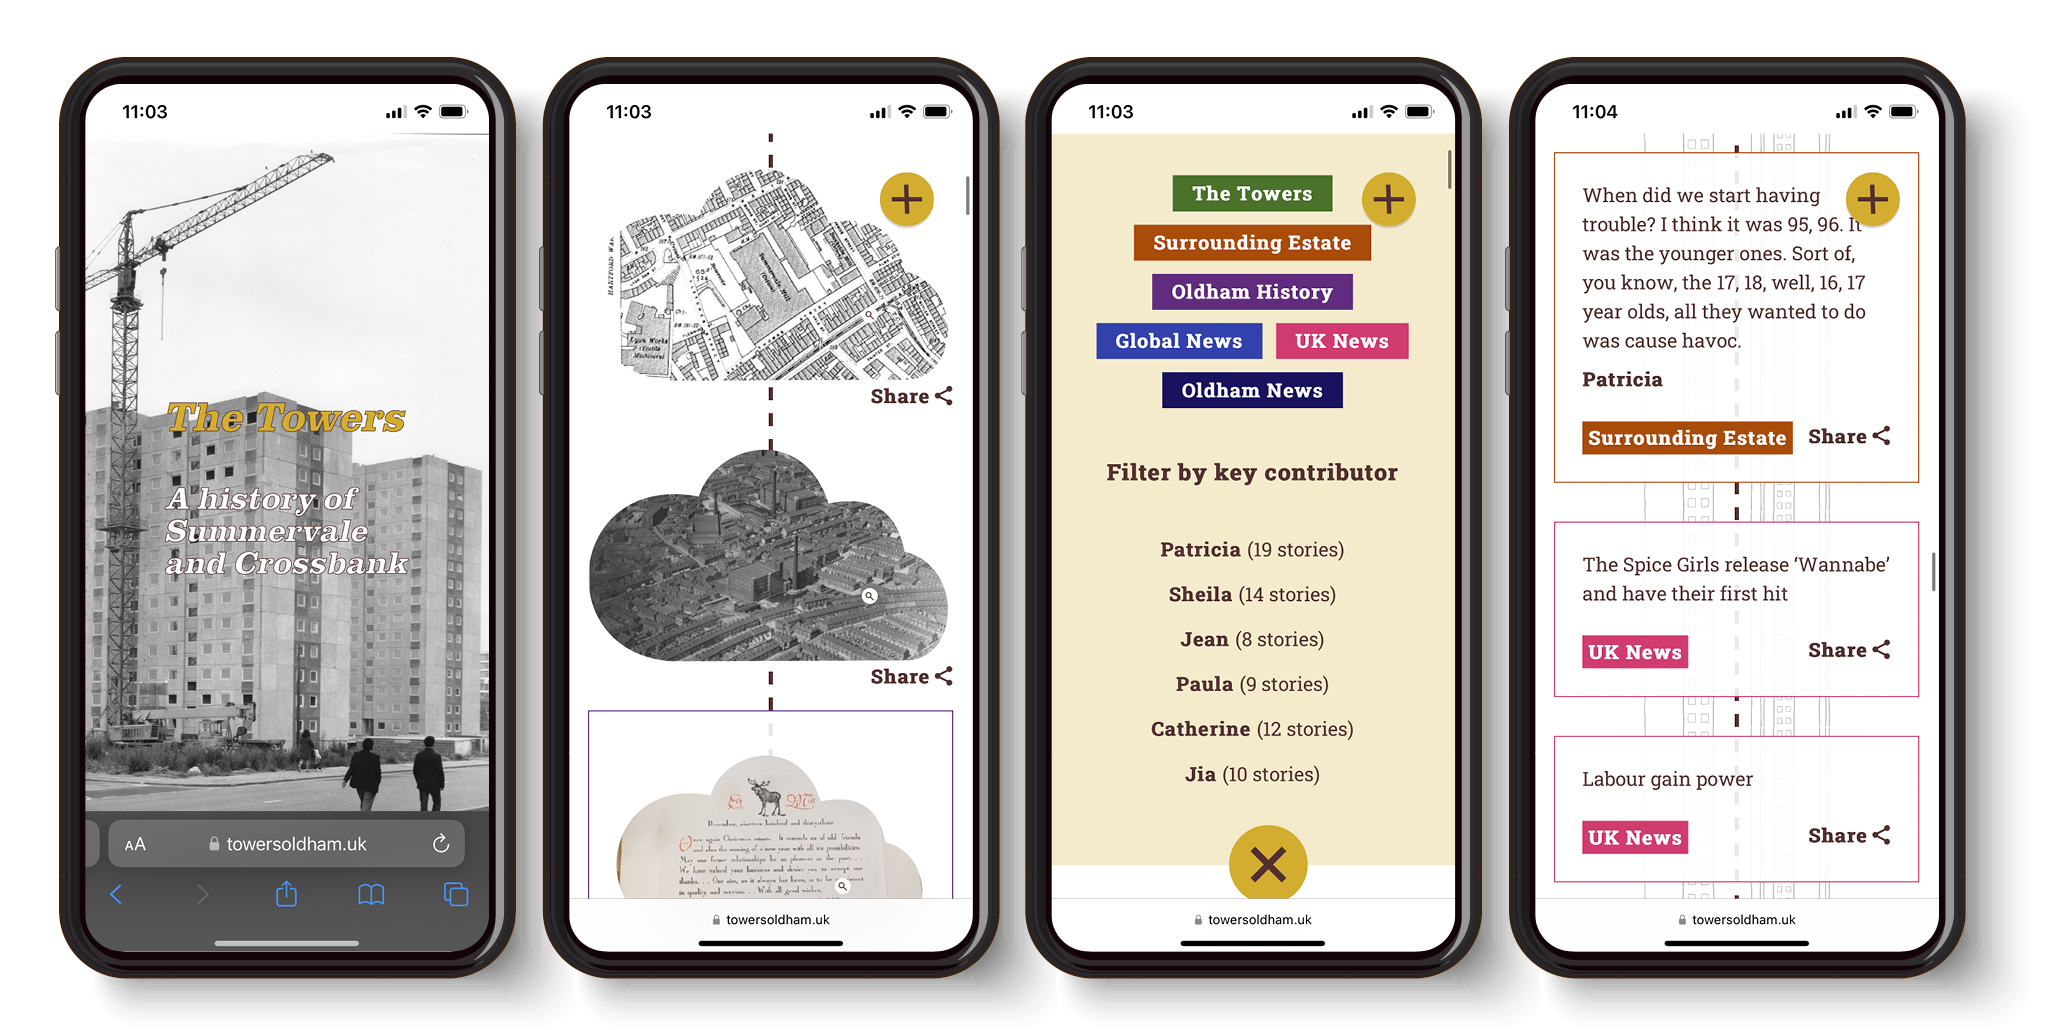 Four mockups showing the website on a mobile device, including the header image, cloud-shaped maps and aerial photos, the filtering system, and some text-based stories